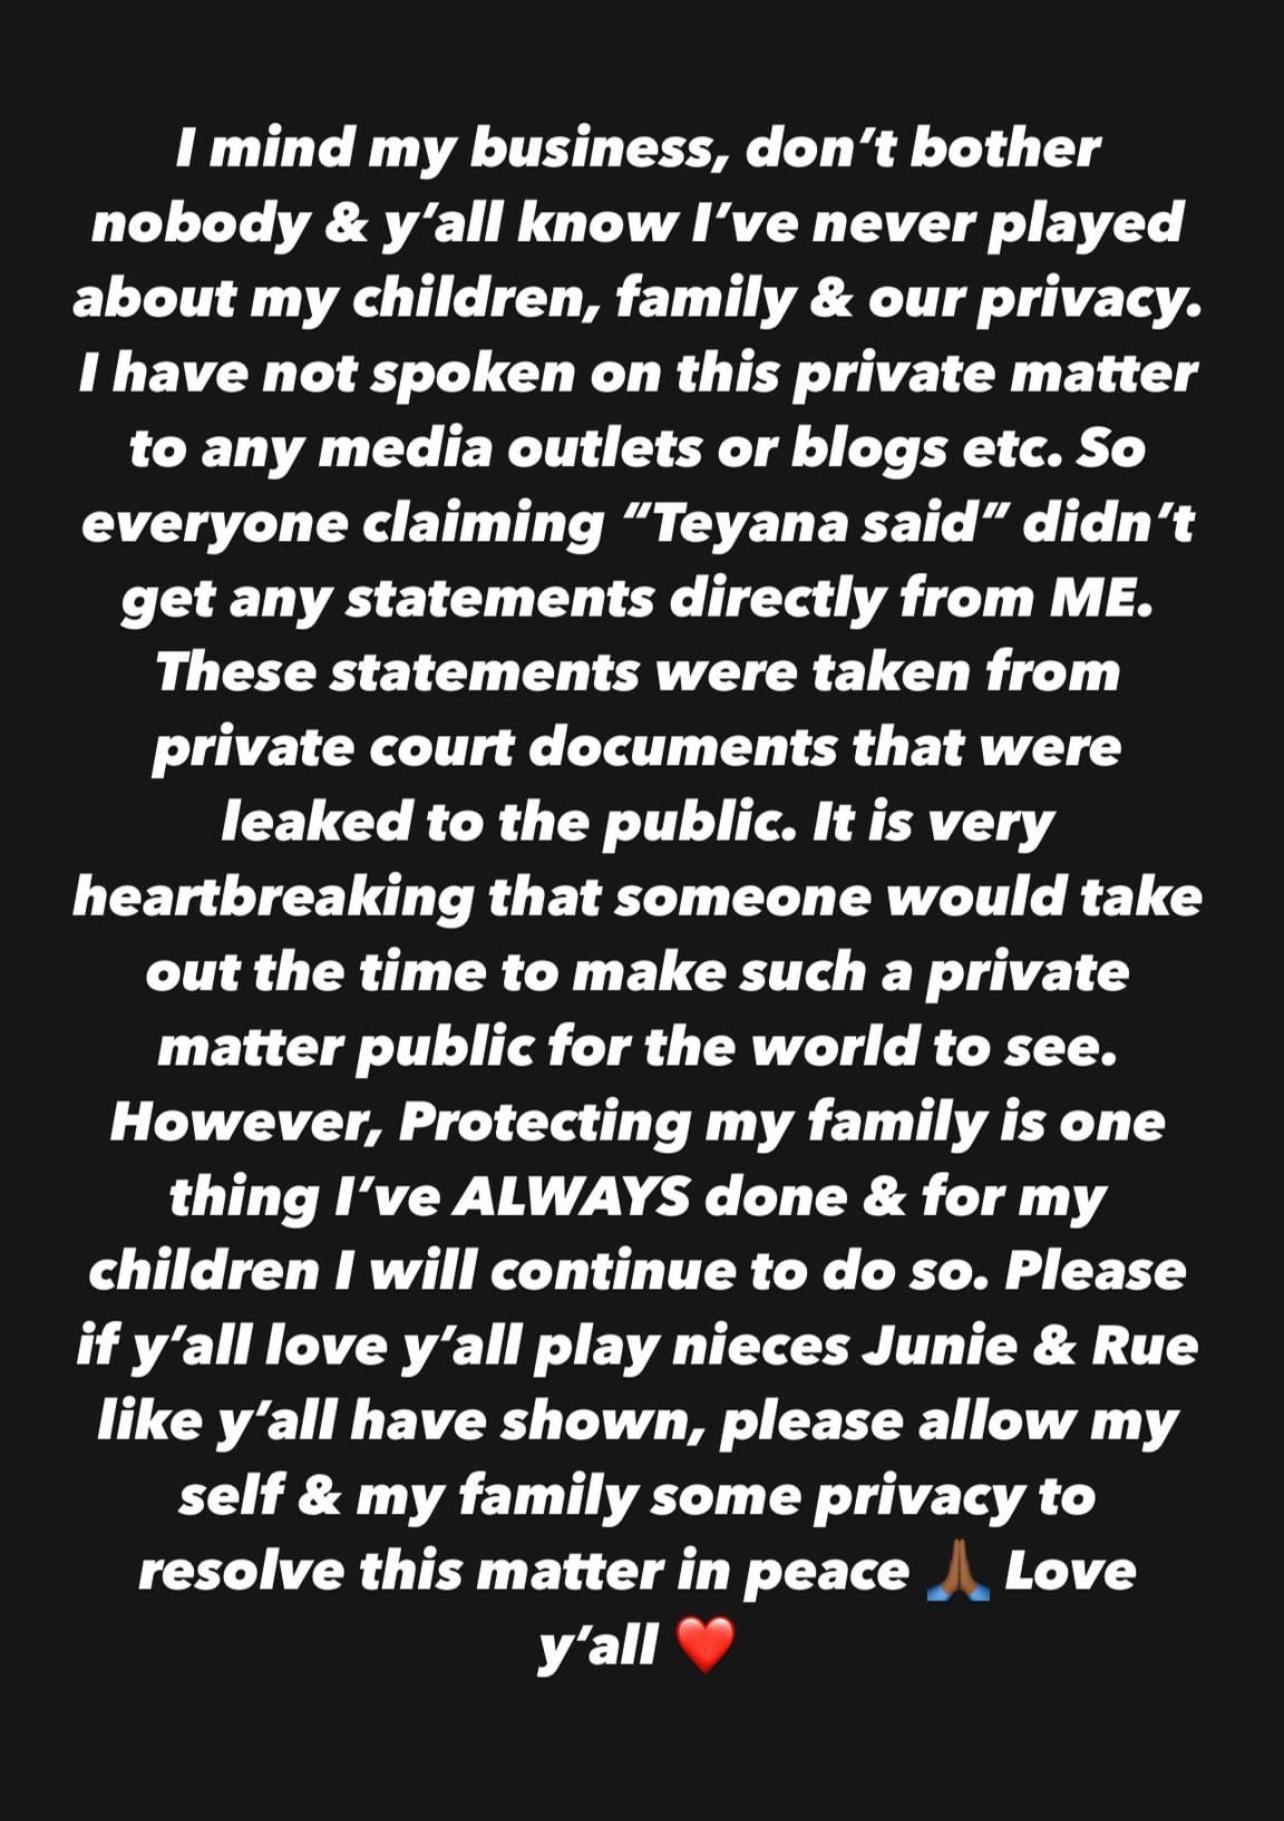 Teyana Taylor Focused On 'Protecting Family' Amid Leaked Divorce Documents